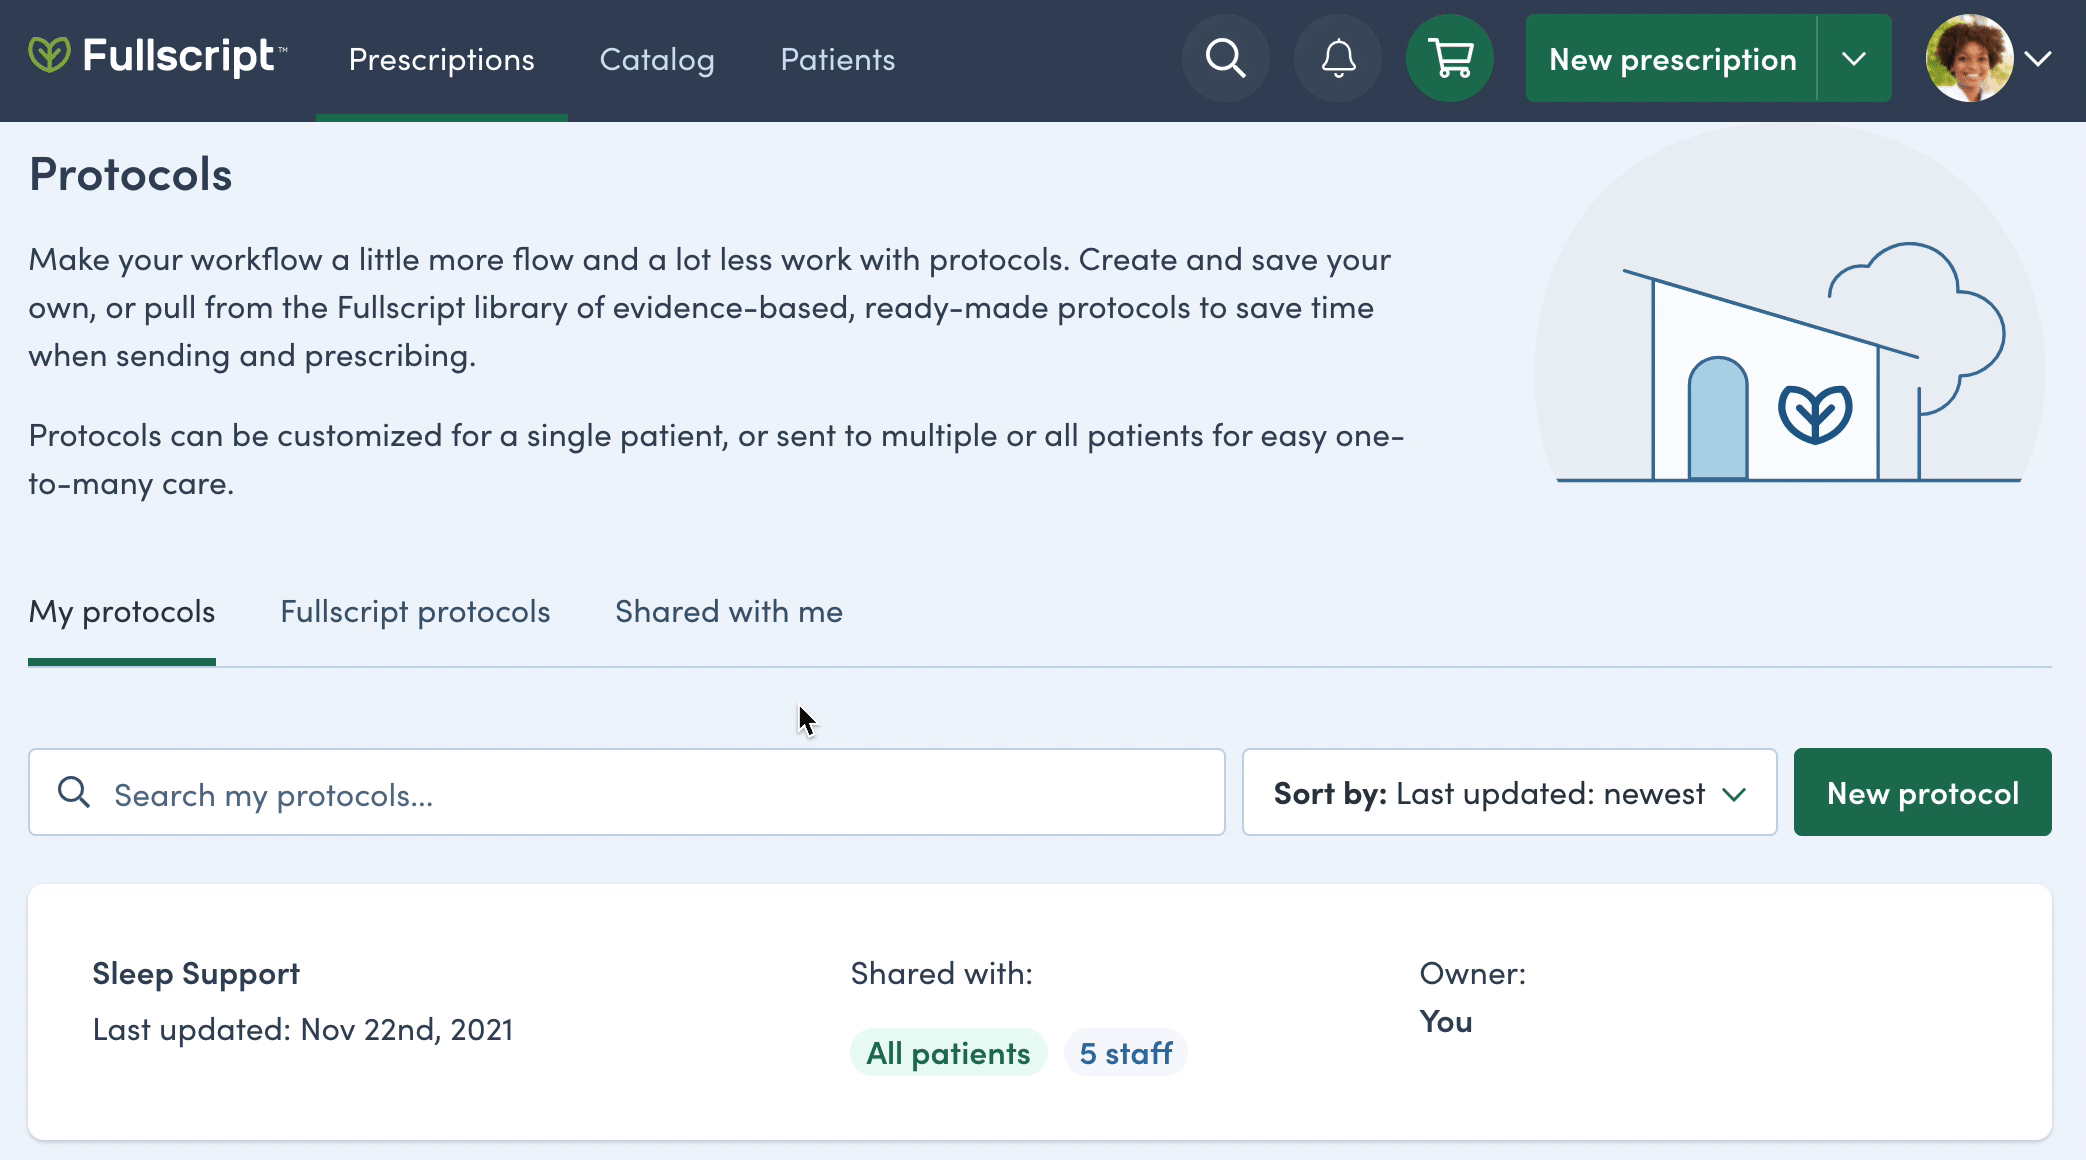 hover over owner and select share